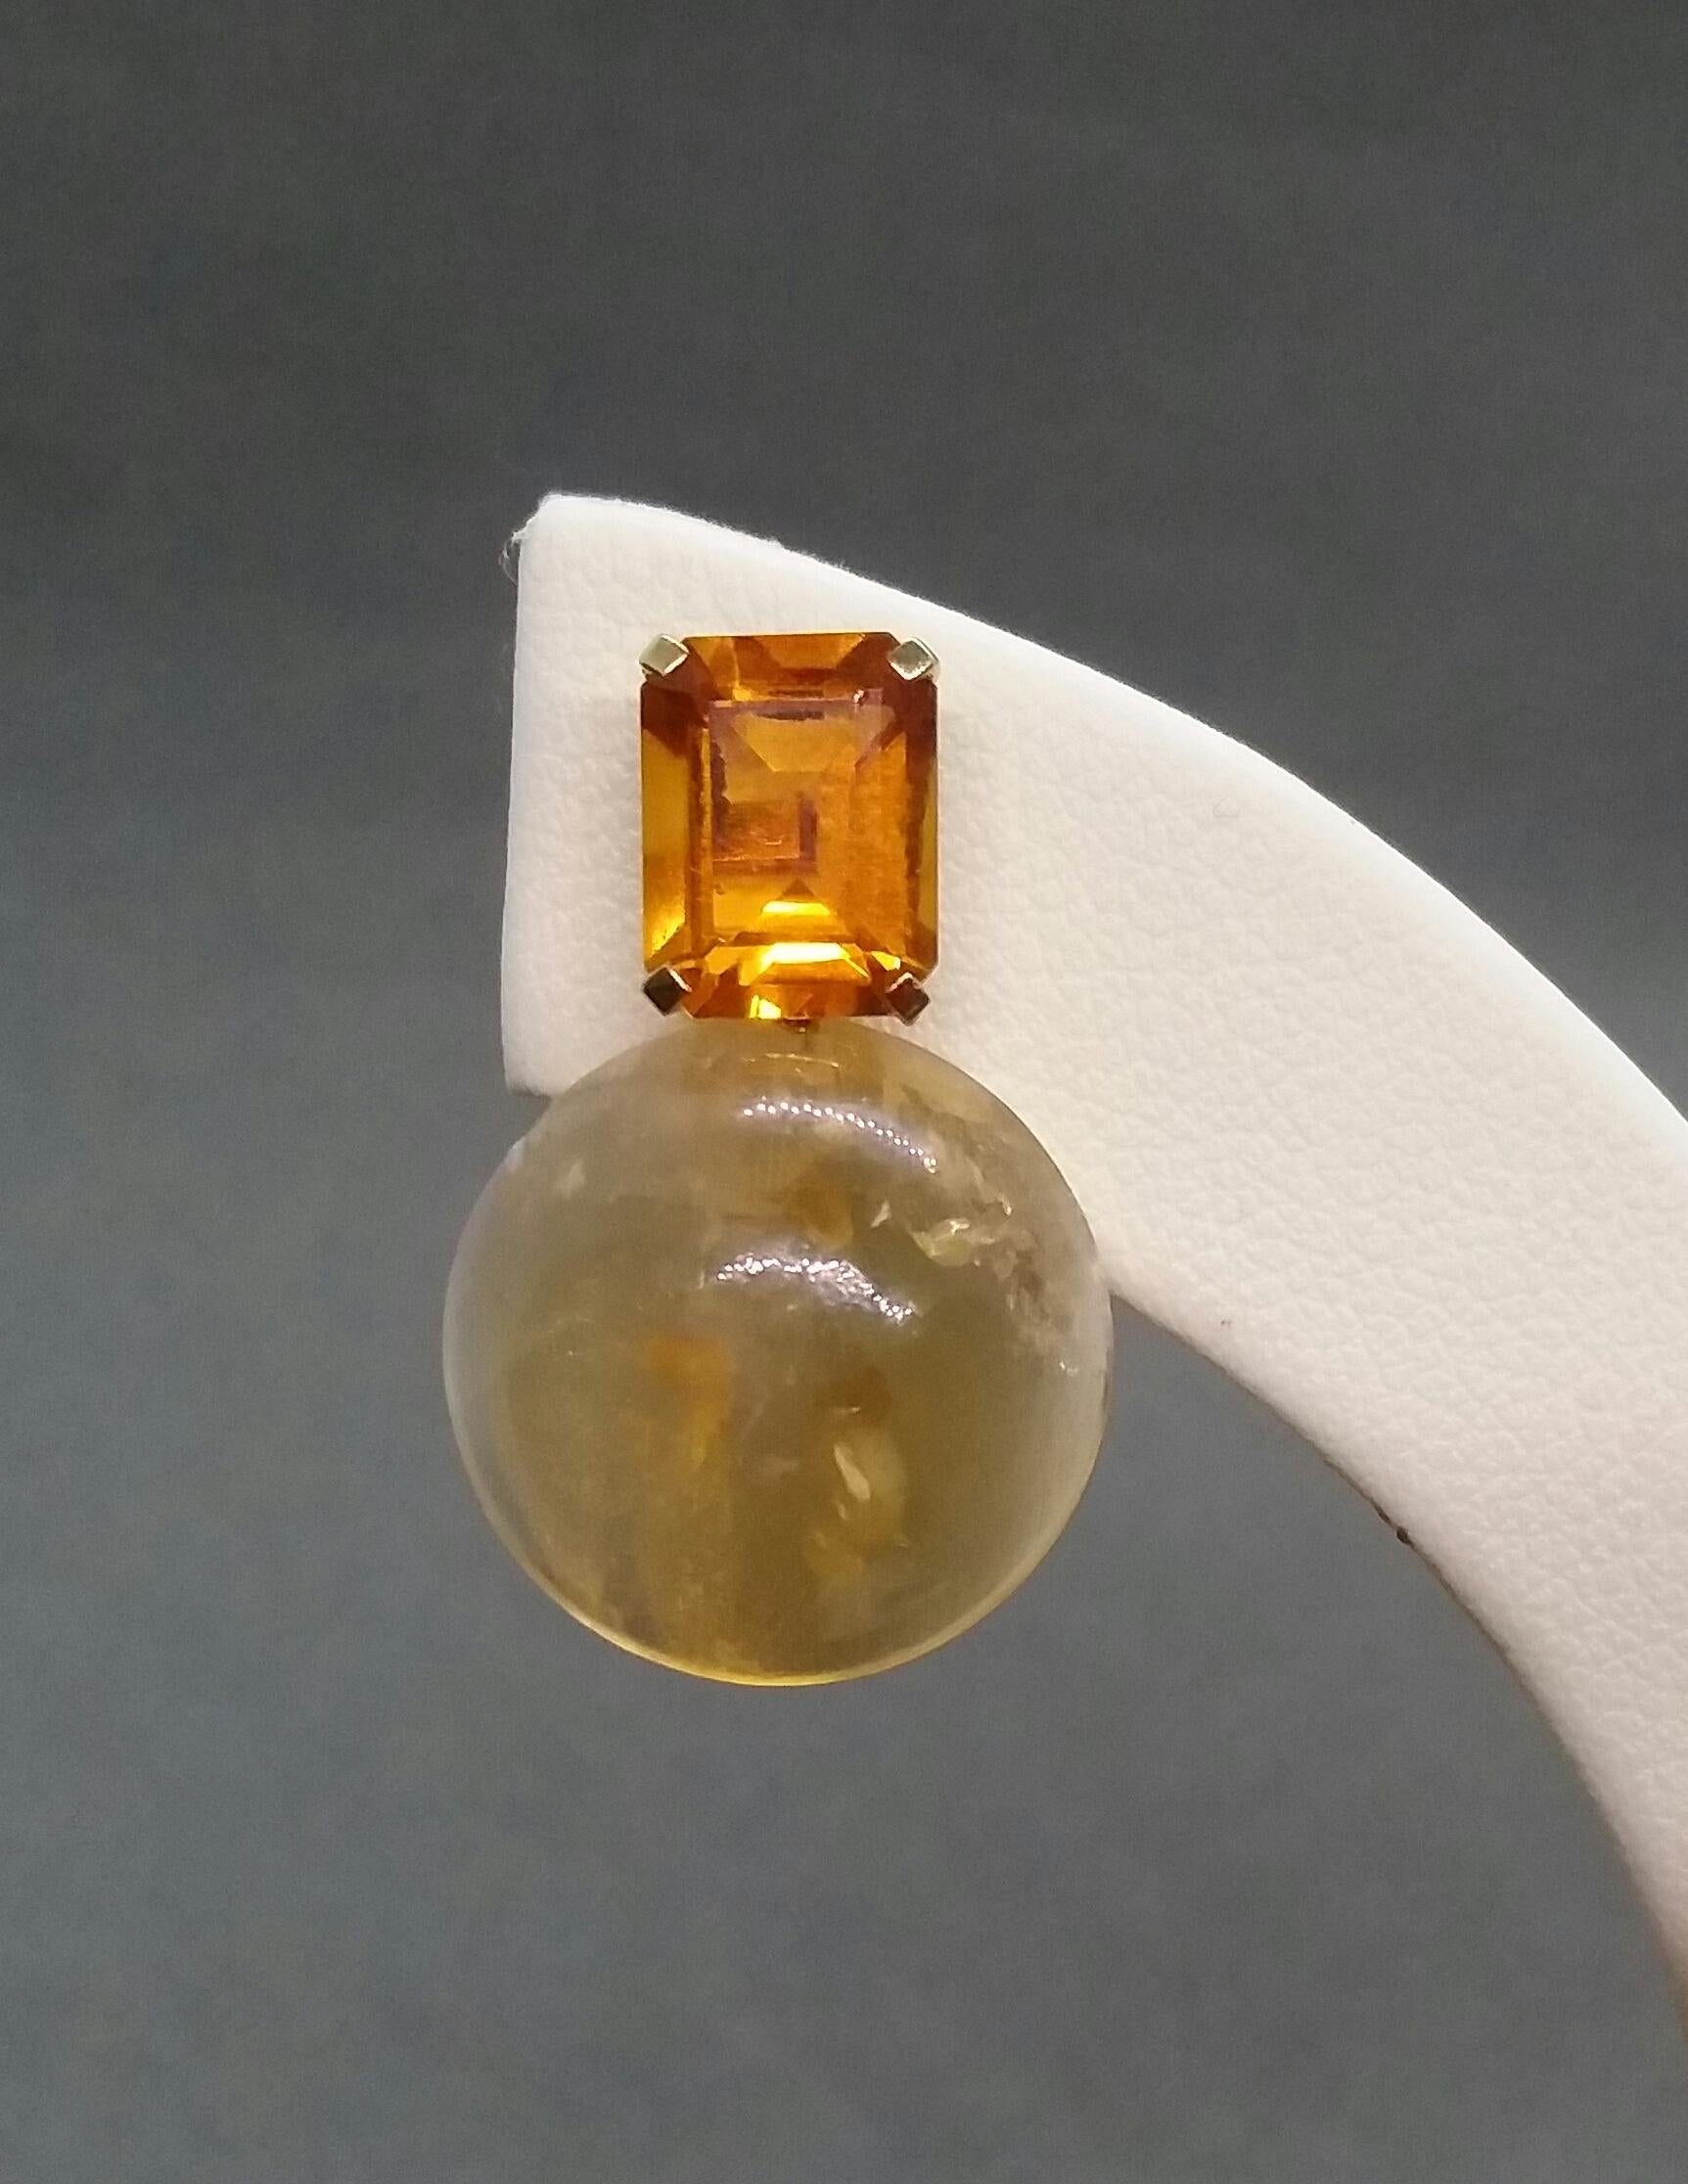 Octagon Cut Faceted Cognac Citrine Golden Citrine Button 14 Kt Solid Yellow Gold For Sale 8